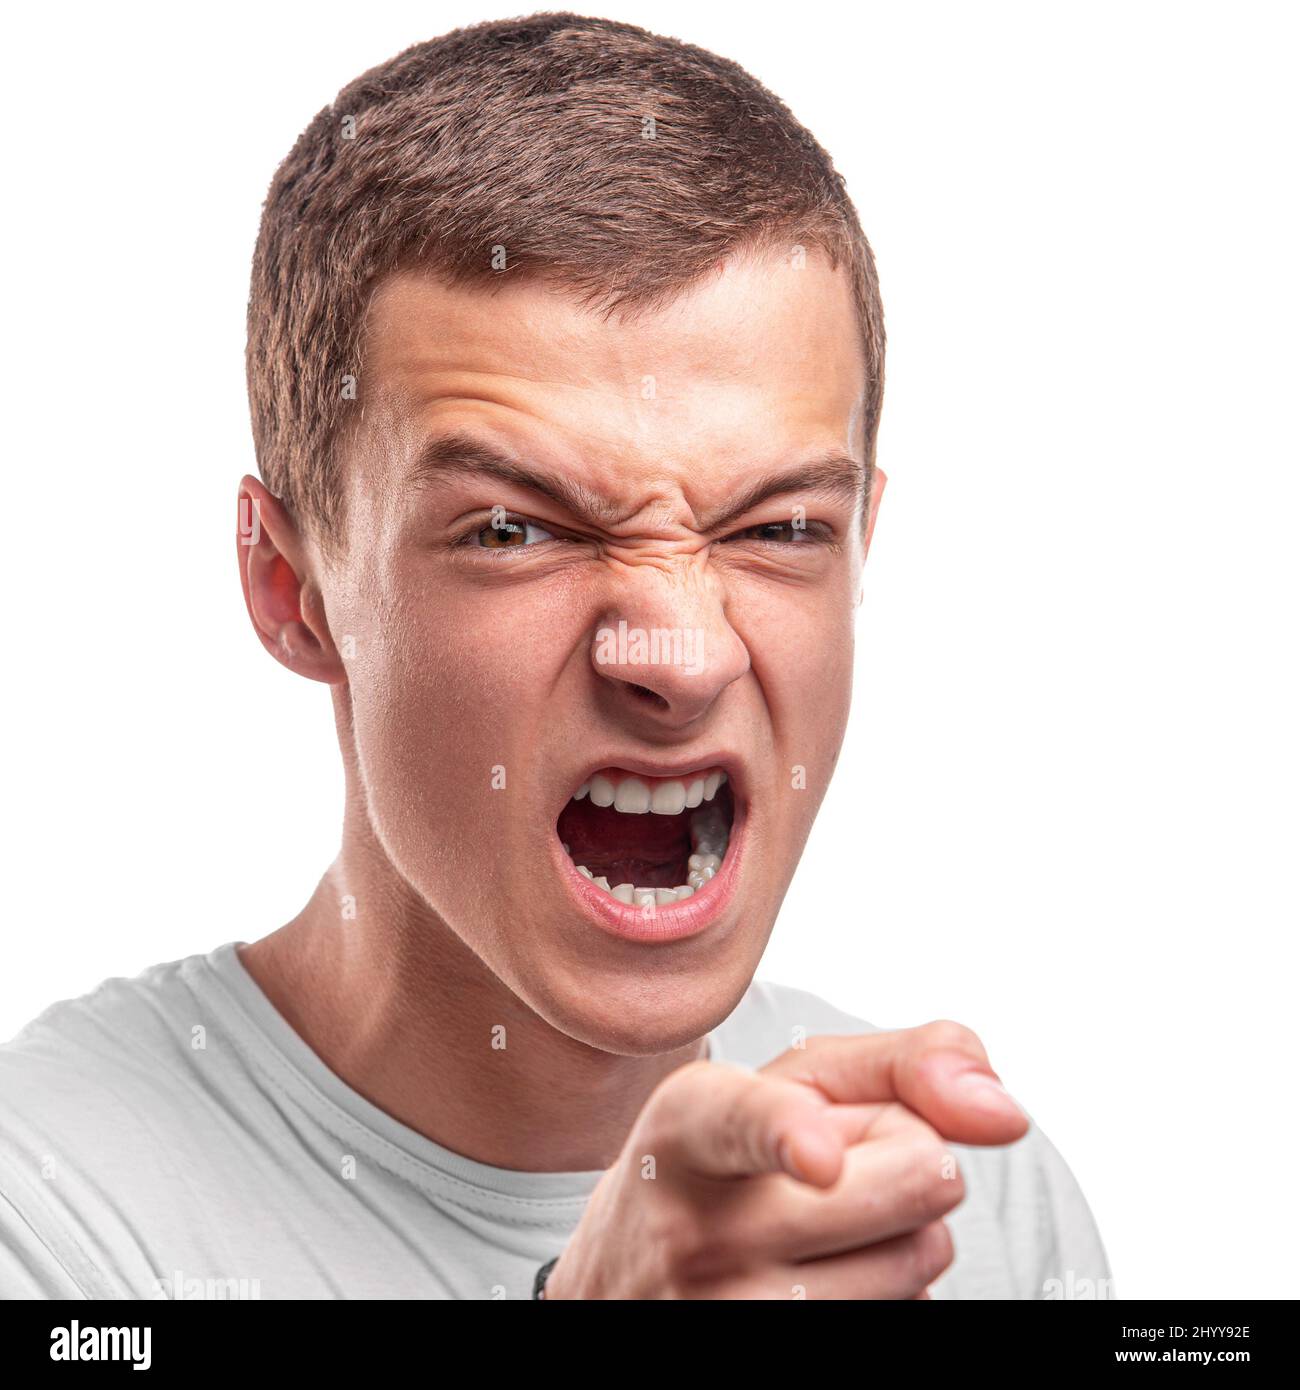 Aggressive young man points his finger. Stock Photo